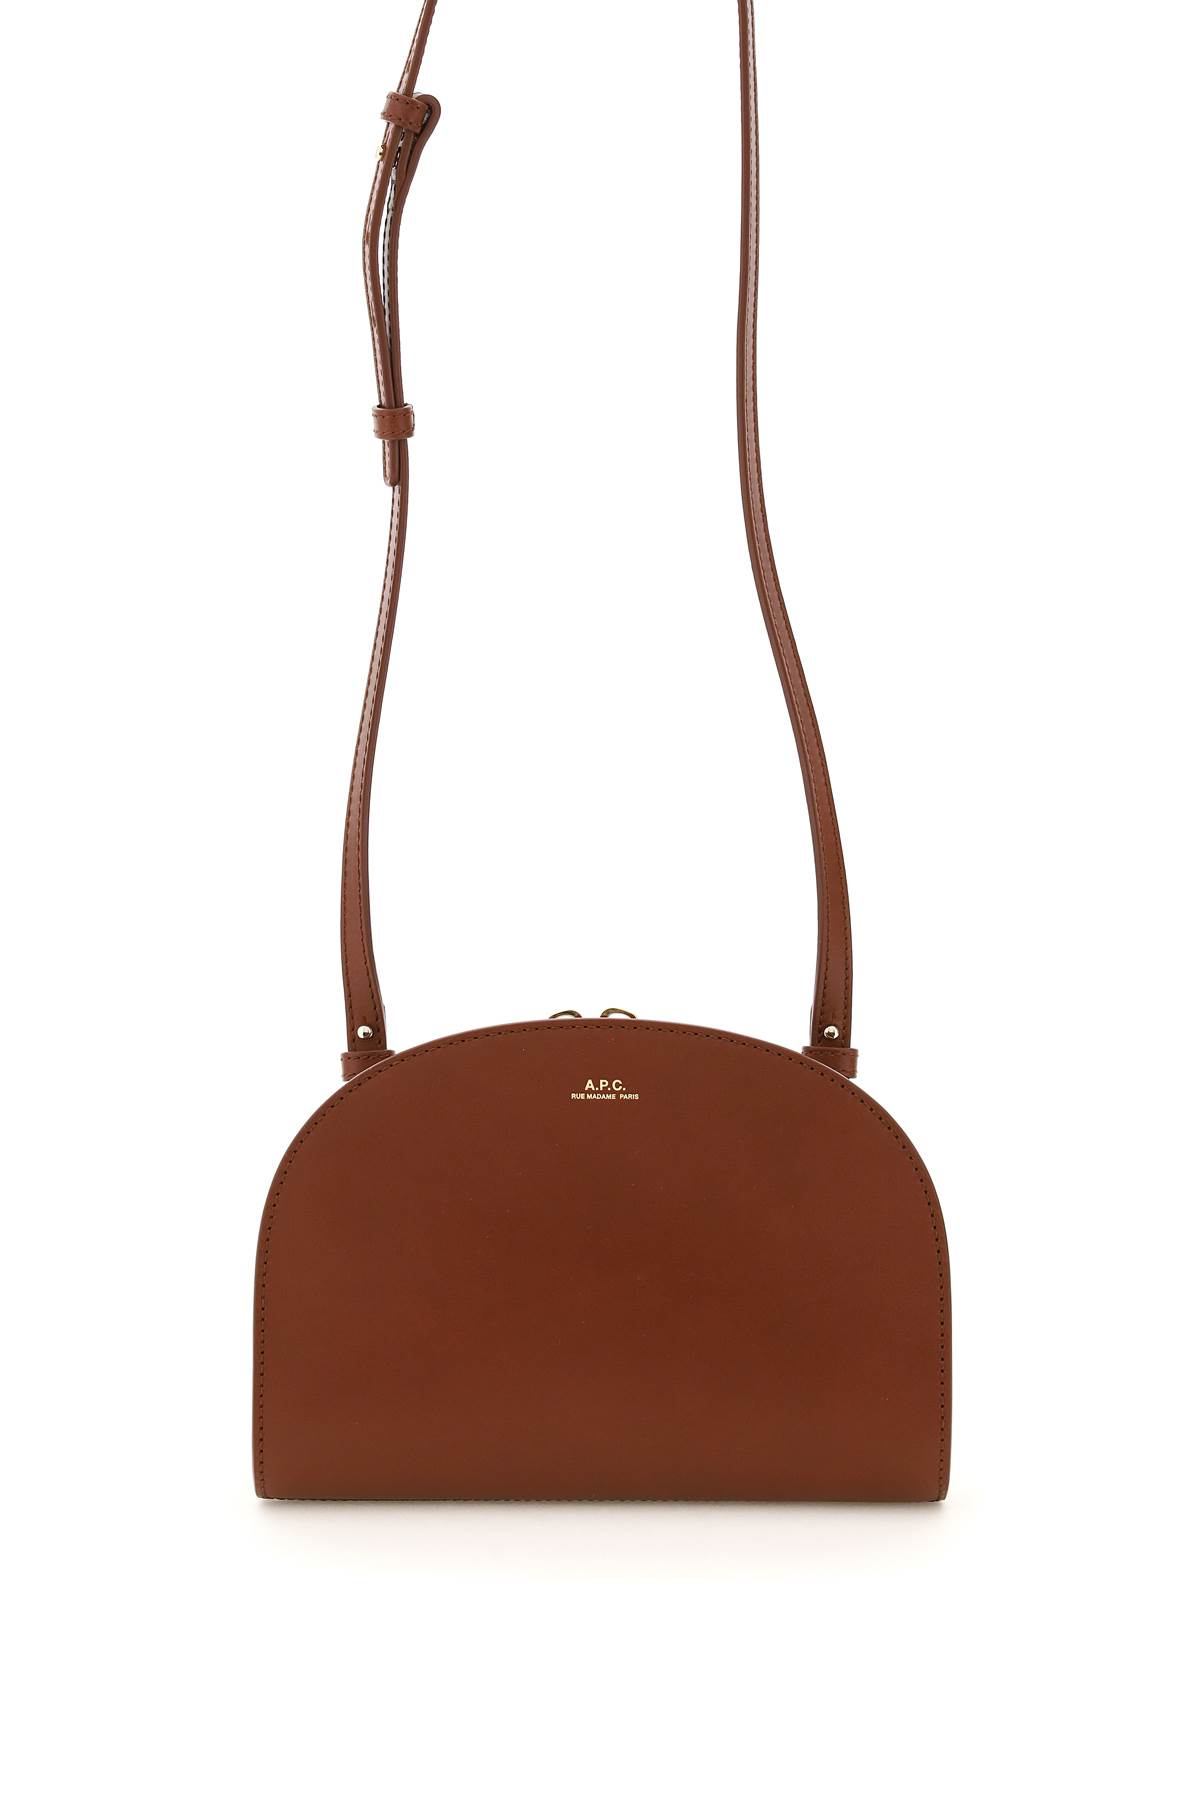 Shop Apc Demi-lune Leather Clucth In Noisette (brown)